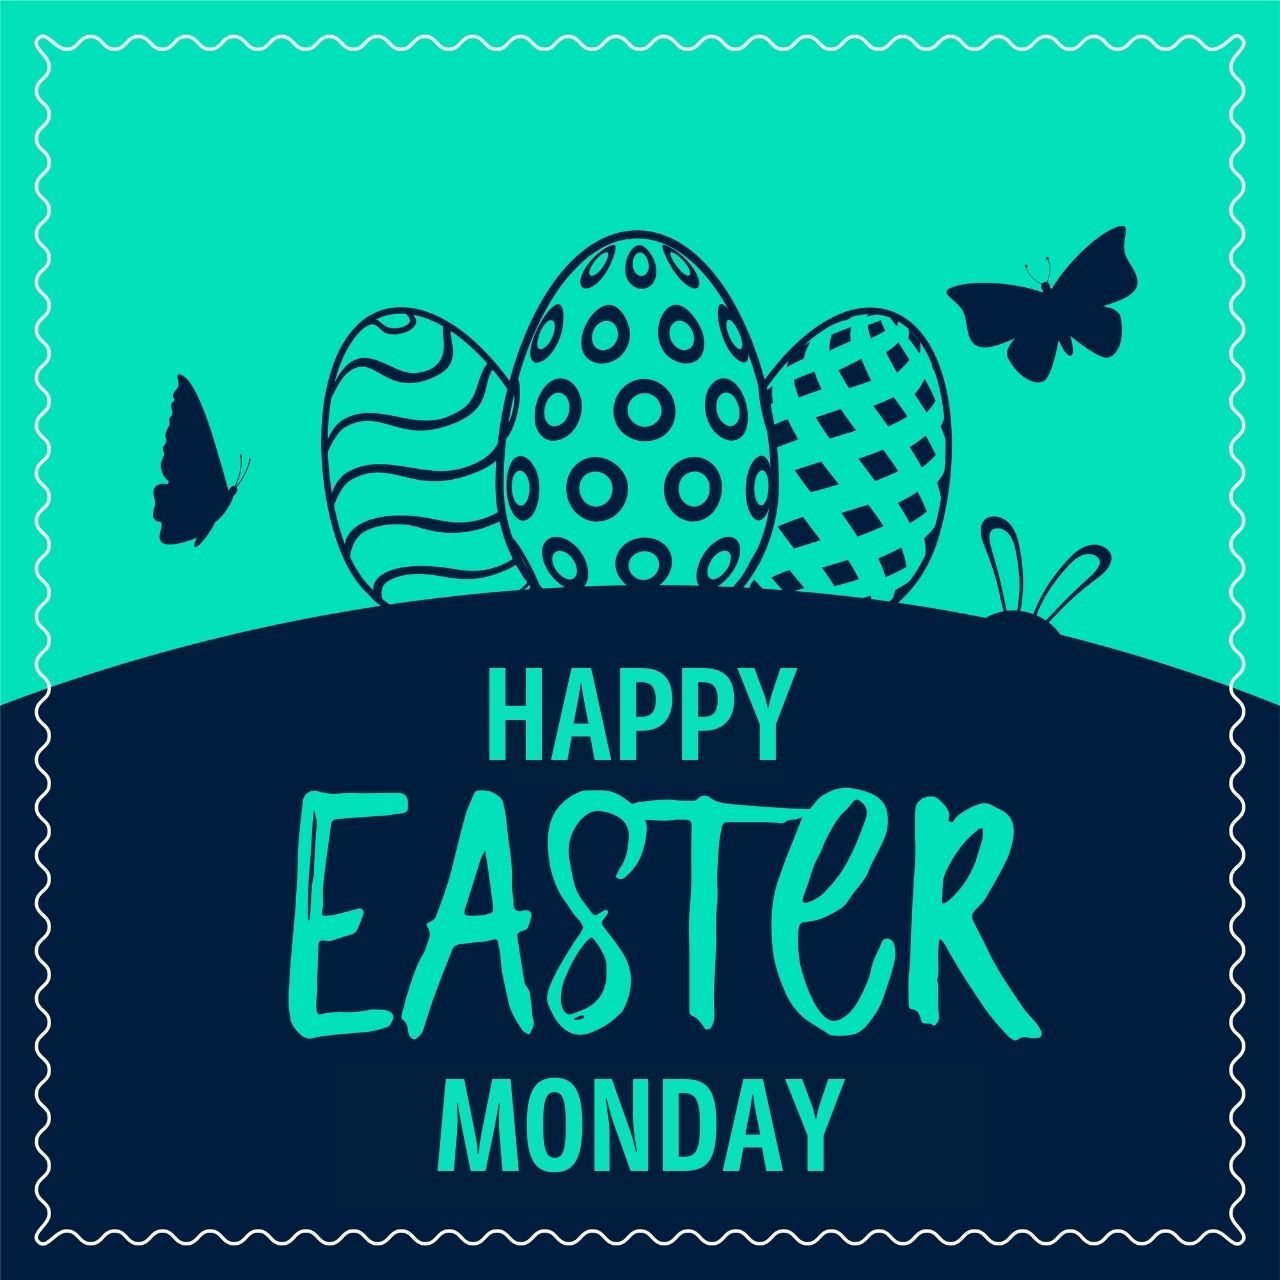 Easter Monday 2022: Top Wishes, Quotes, HD Images, Sayings, Greetings, Instagram Captions, And WhatsApp Status